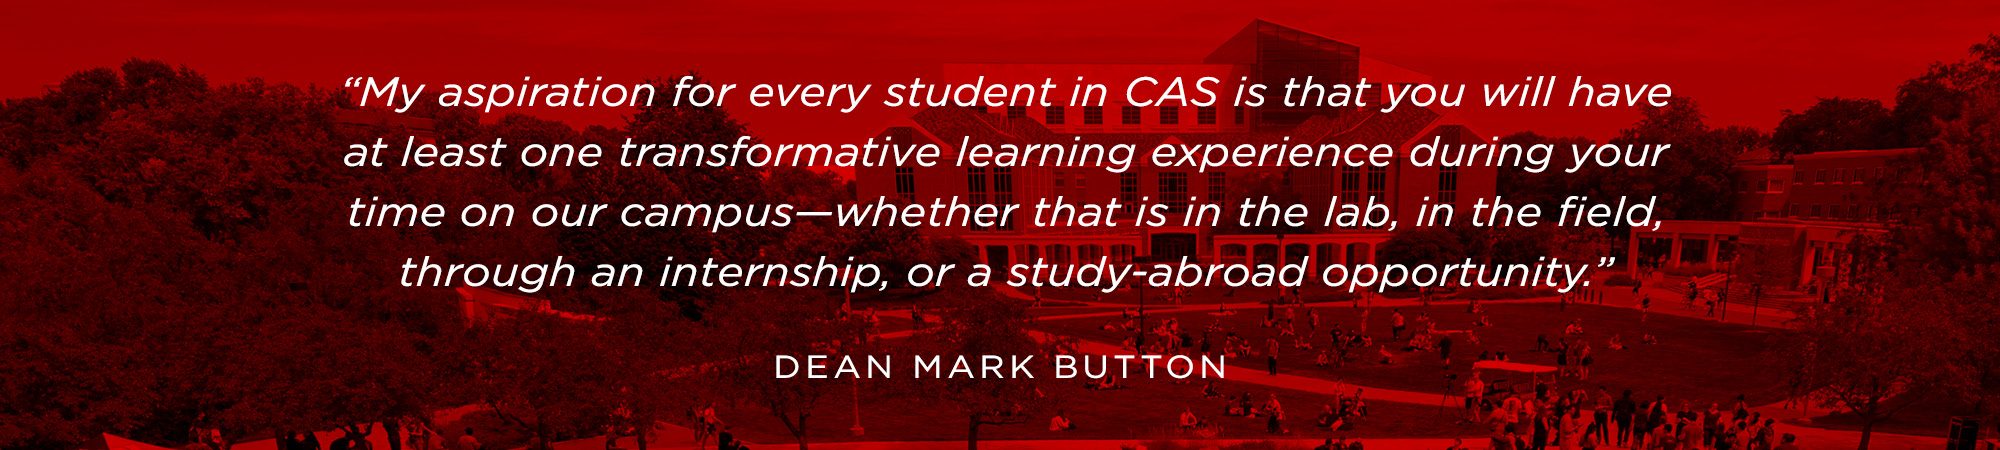 "My aspiration for every student in CAS is that you will have at least one transformative learning experience during your time on our campus - whether that is in the lab, in the field, through an internship, or a study-abroad opportunity." - Dean Mark But